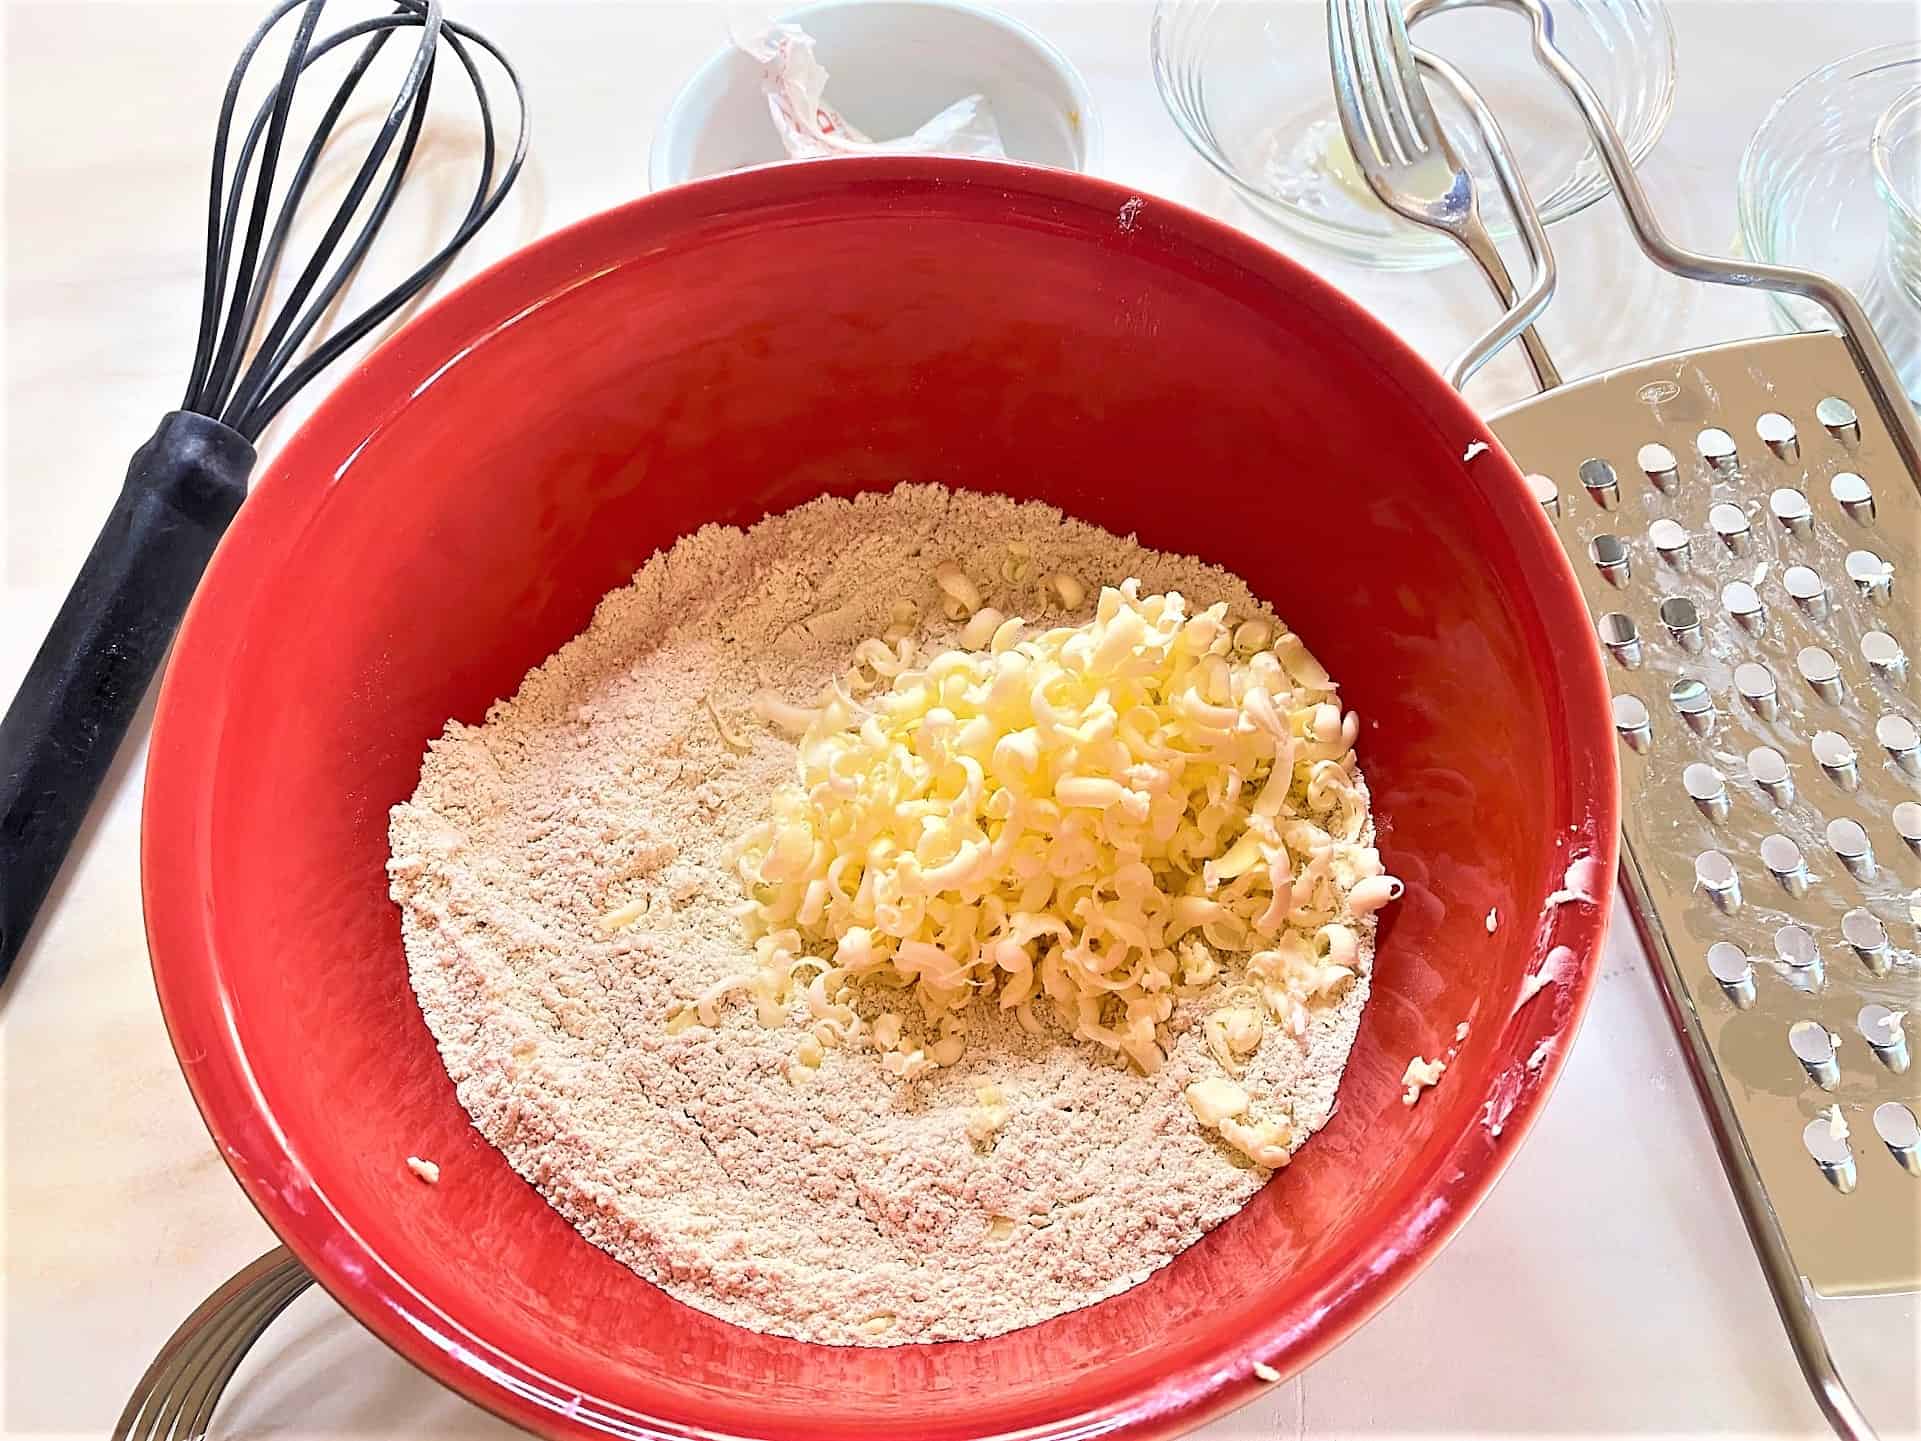 Shreds of grated yellow butter on top of flours in red bowl with whisk off to the side and grater